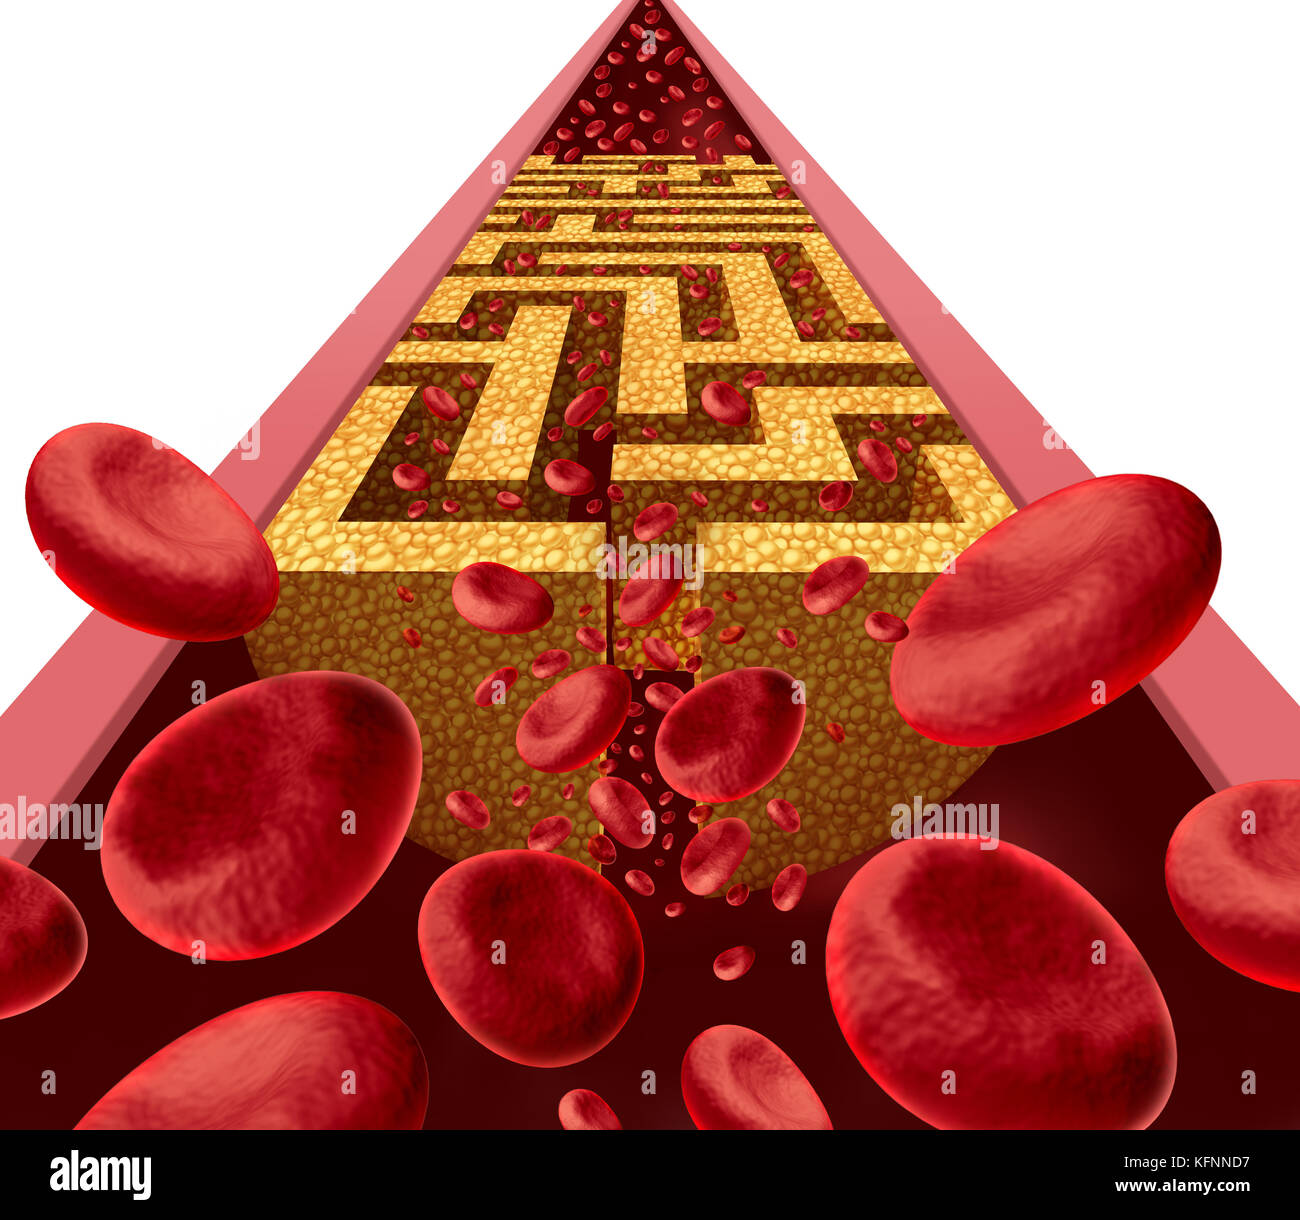 Cholesterol disease challenge and clogged artery medical coronary health risk as a blockage in arteries shaped as a maze or labyrinth with narrow. Stock Photo